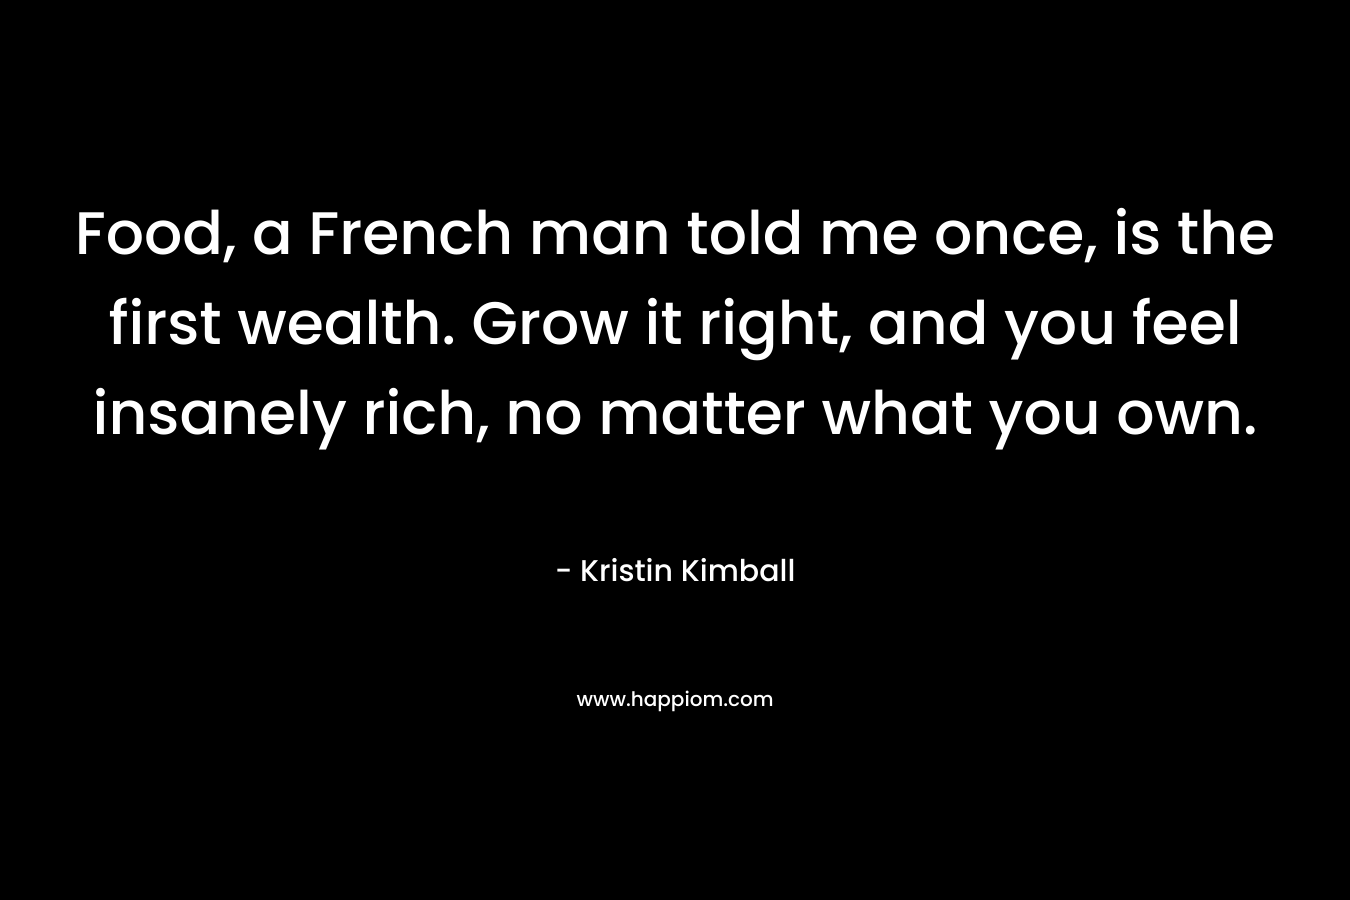 Food, a French man told me once, is the first wealth. Grow it right, and you feel insanely rich, no matter what you own. – Kristin Kimball